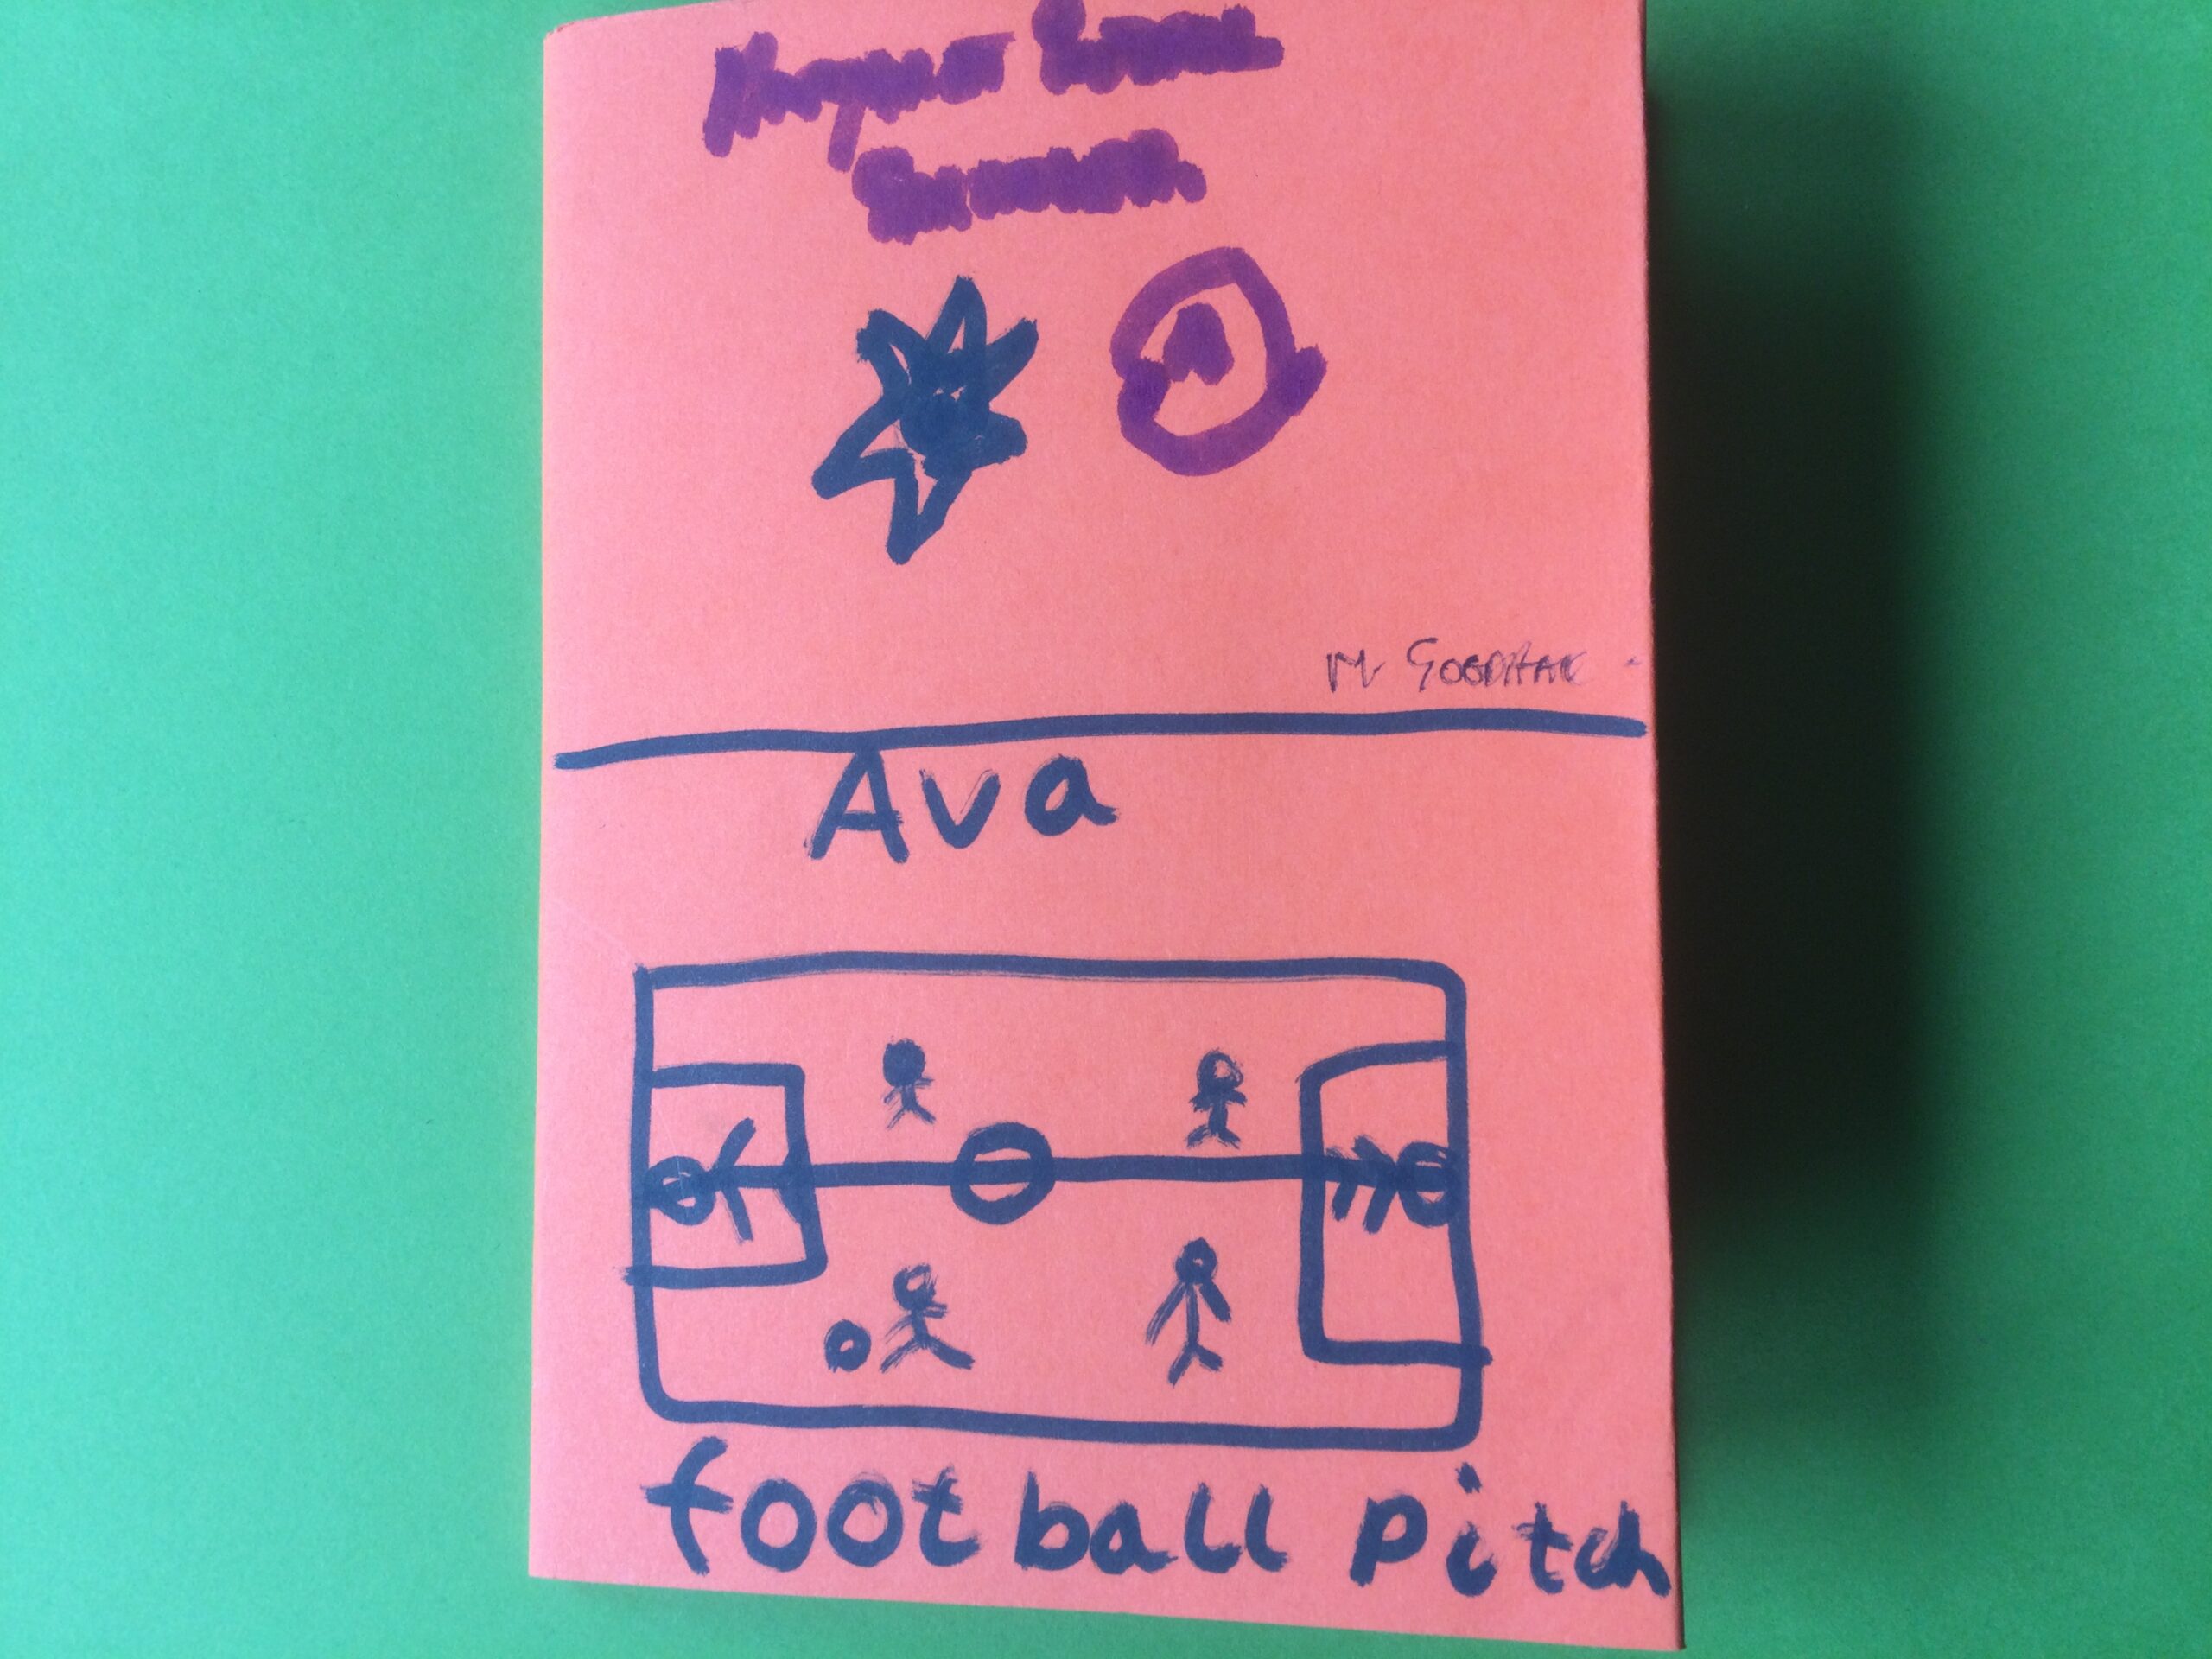 A pink paper booklet with hand drawn image of a football pitch